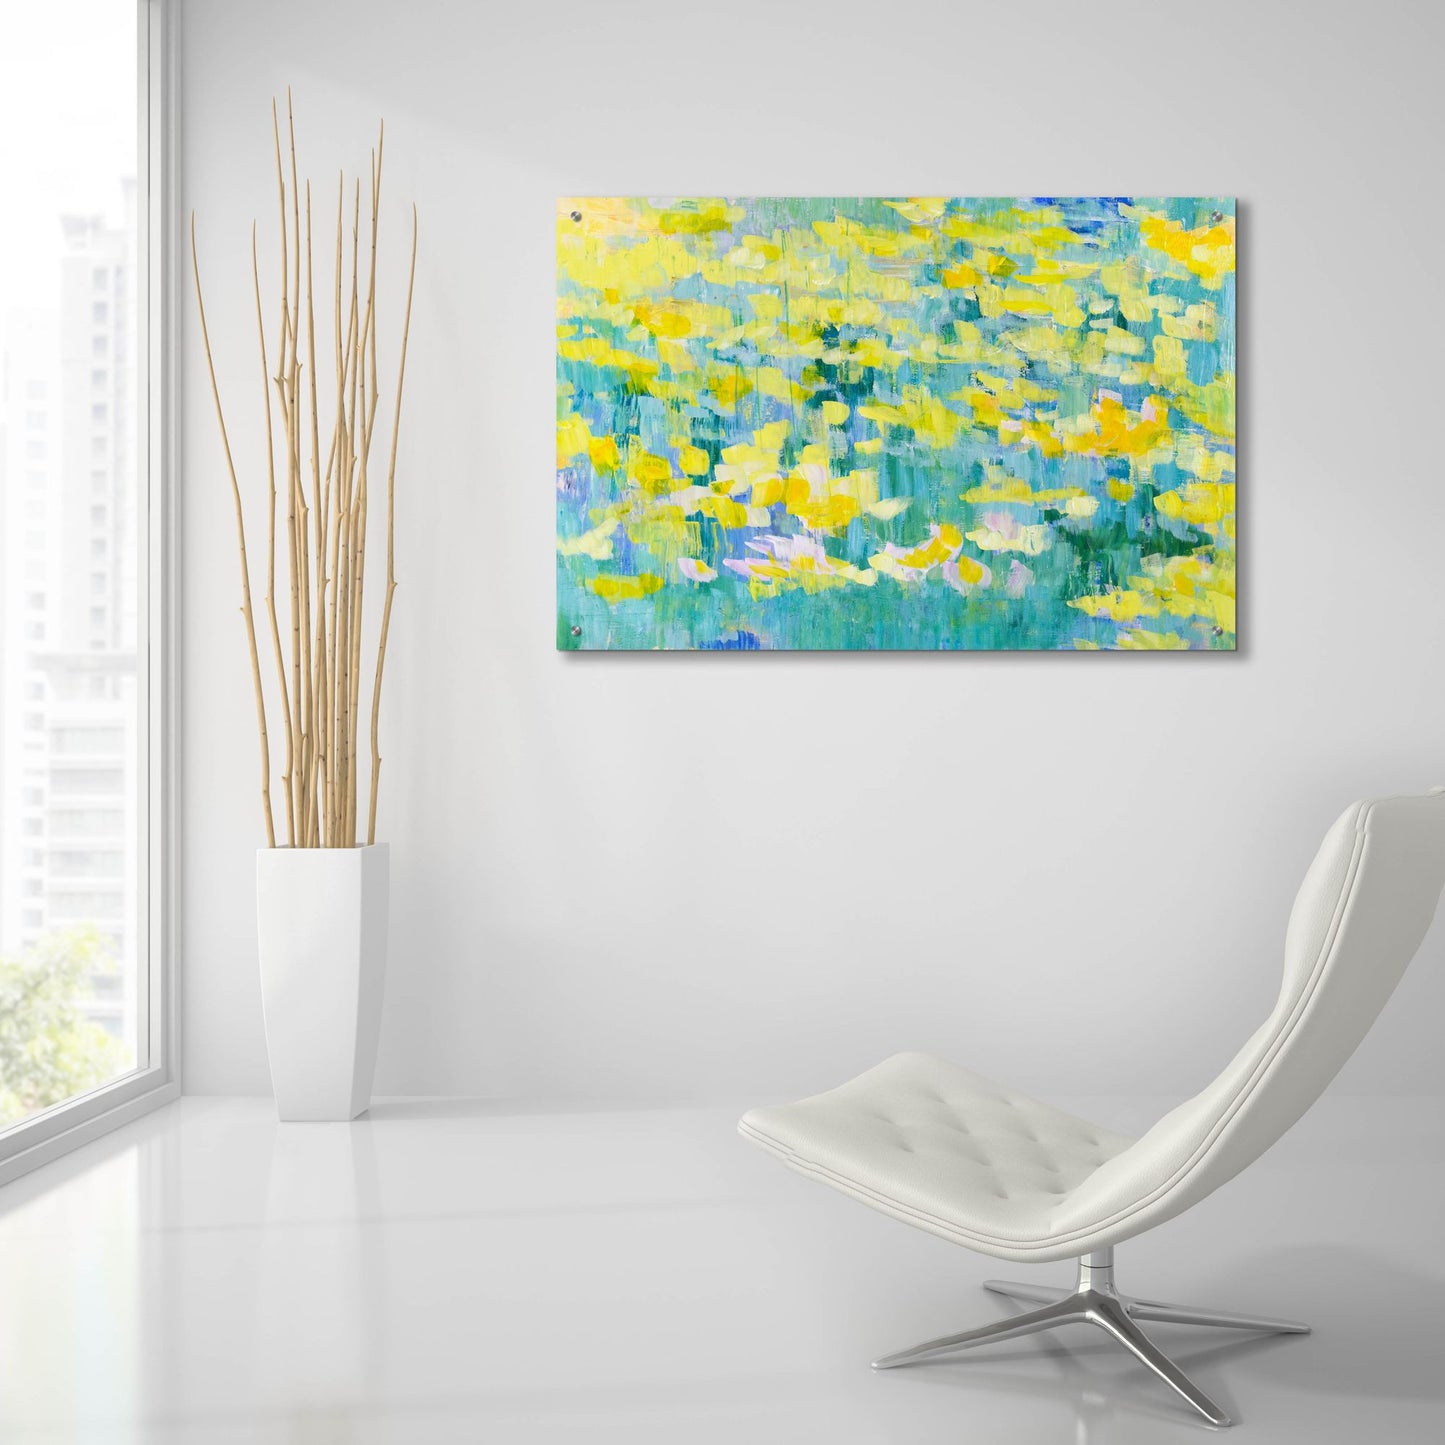 Epic Art 'And They Were All Yellow' by Cassandra Gillens, Acrylic Glass Wall Art,36x24